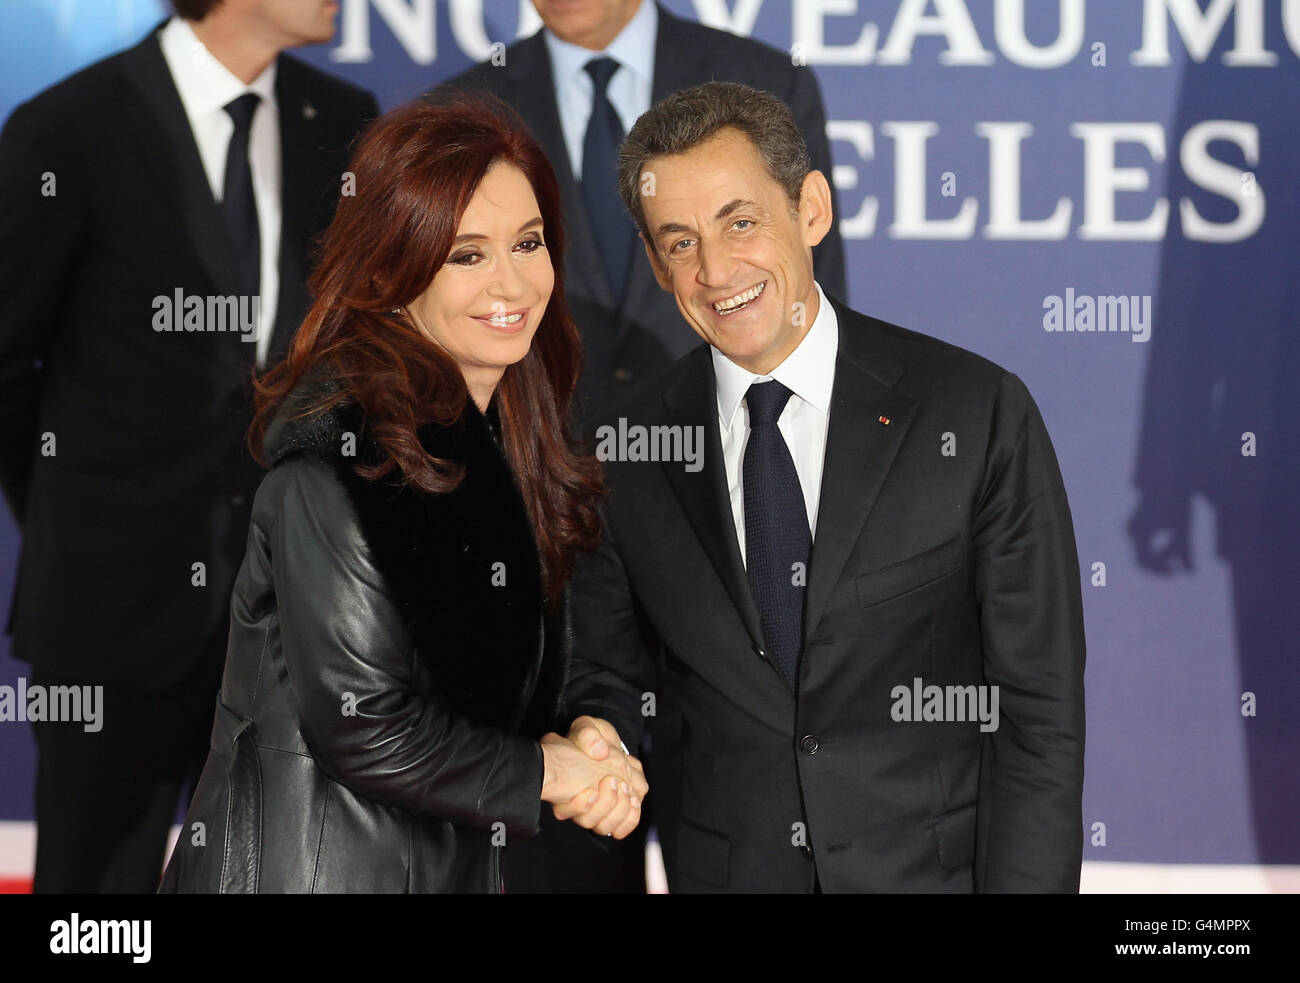 President of Argentina Cristina Fernandez de Kirchner is welcomed by the French President Nicolas Sarkozy to the G20 in Cannes, France. Stock Photo